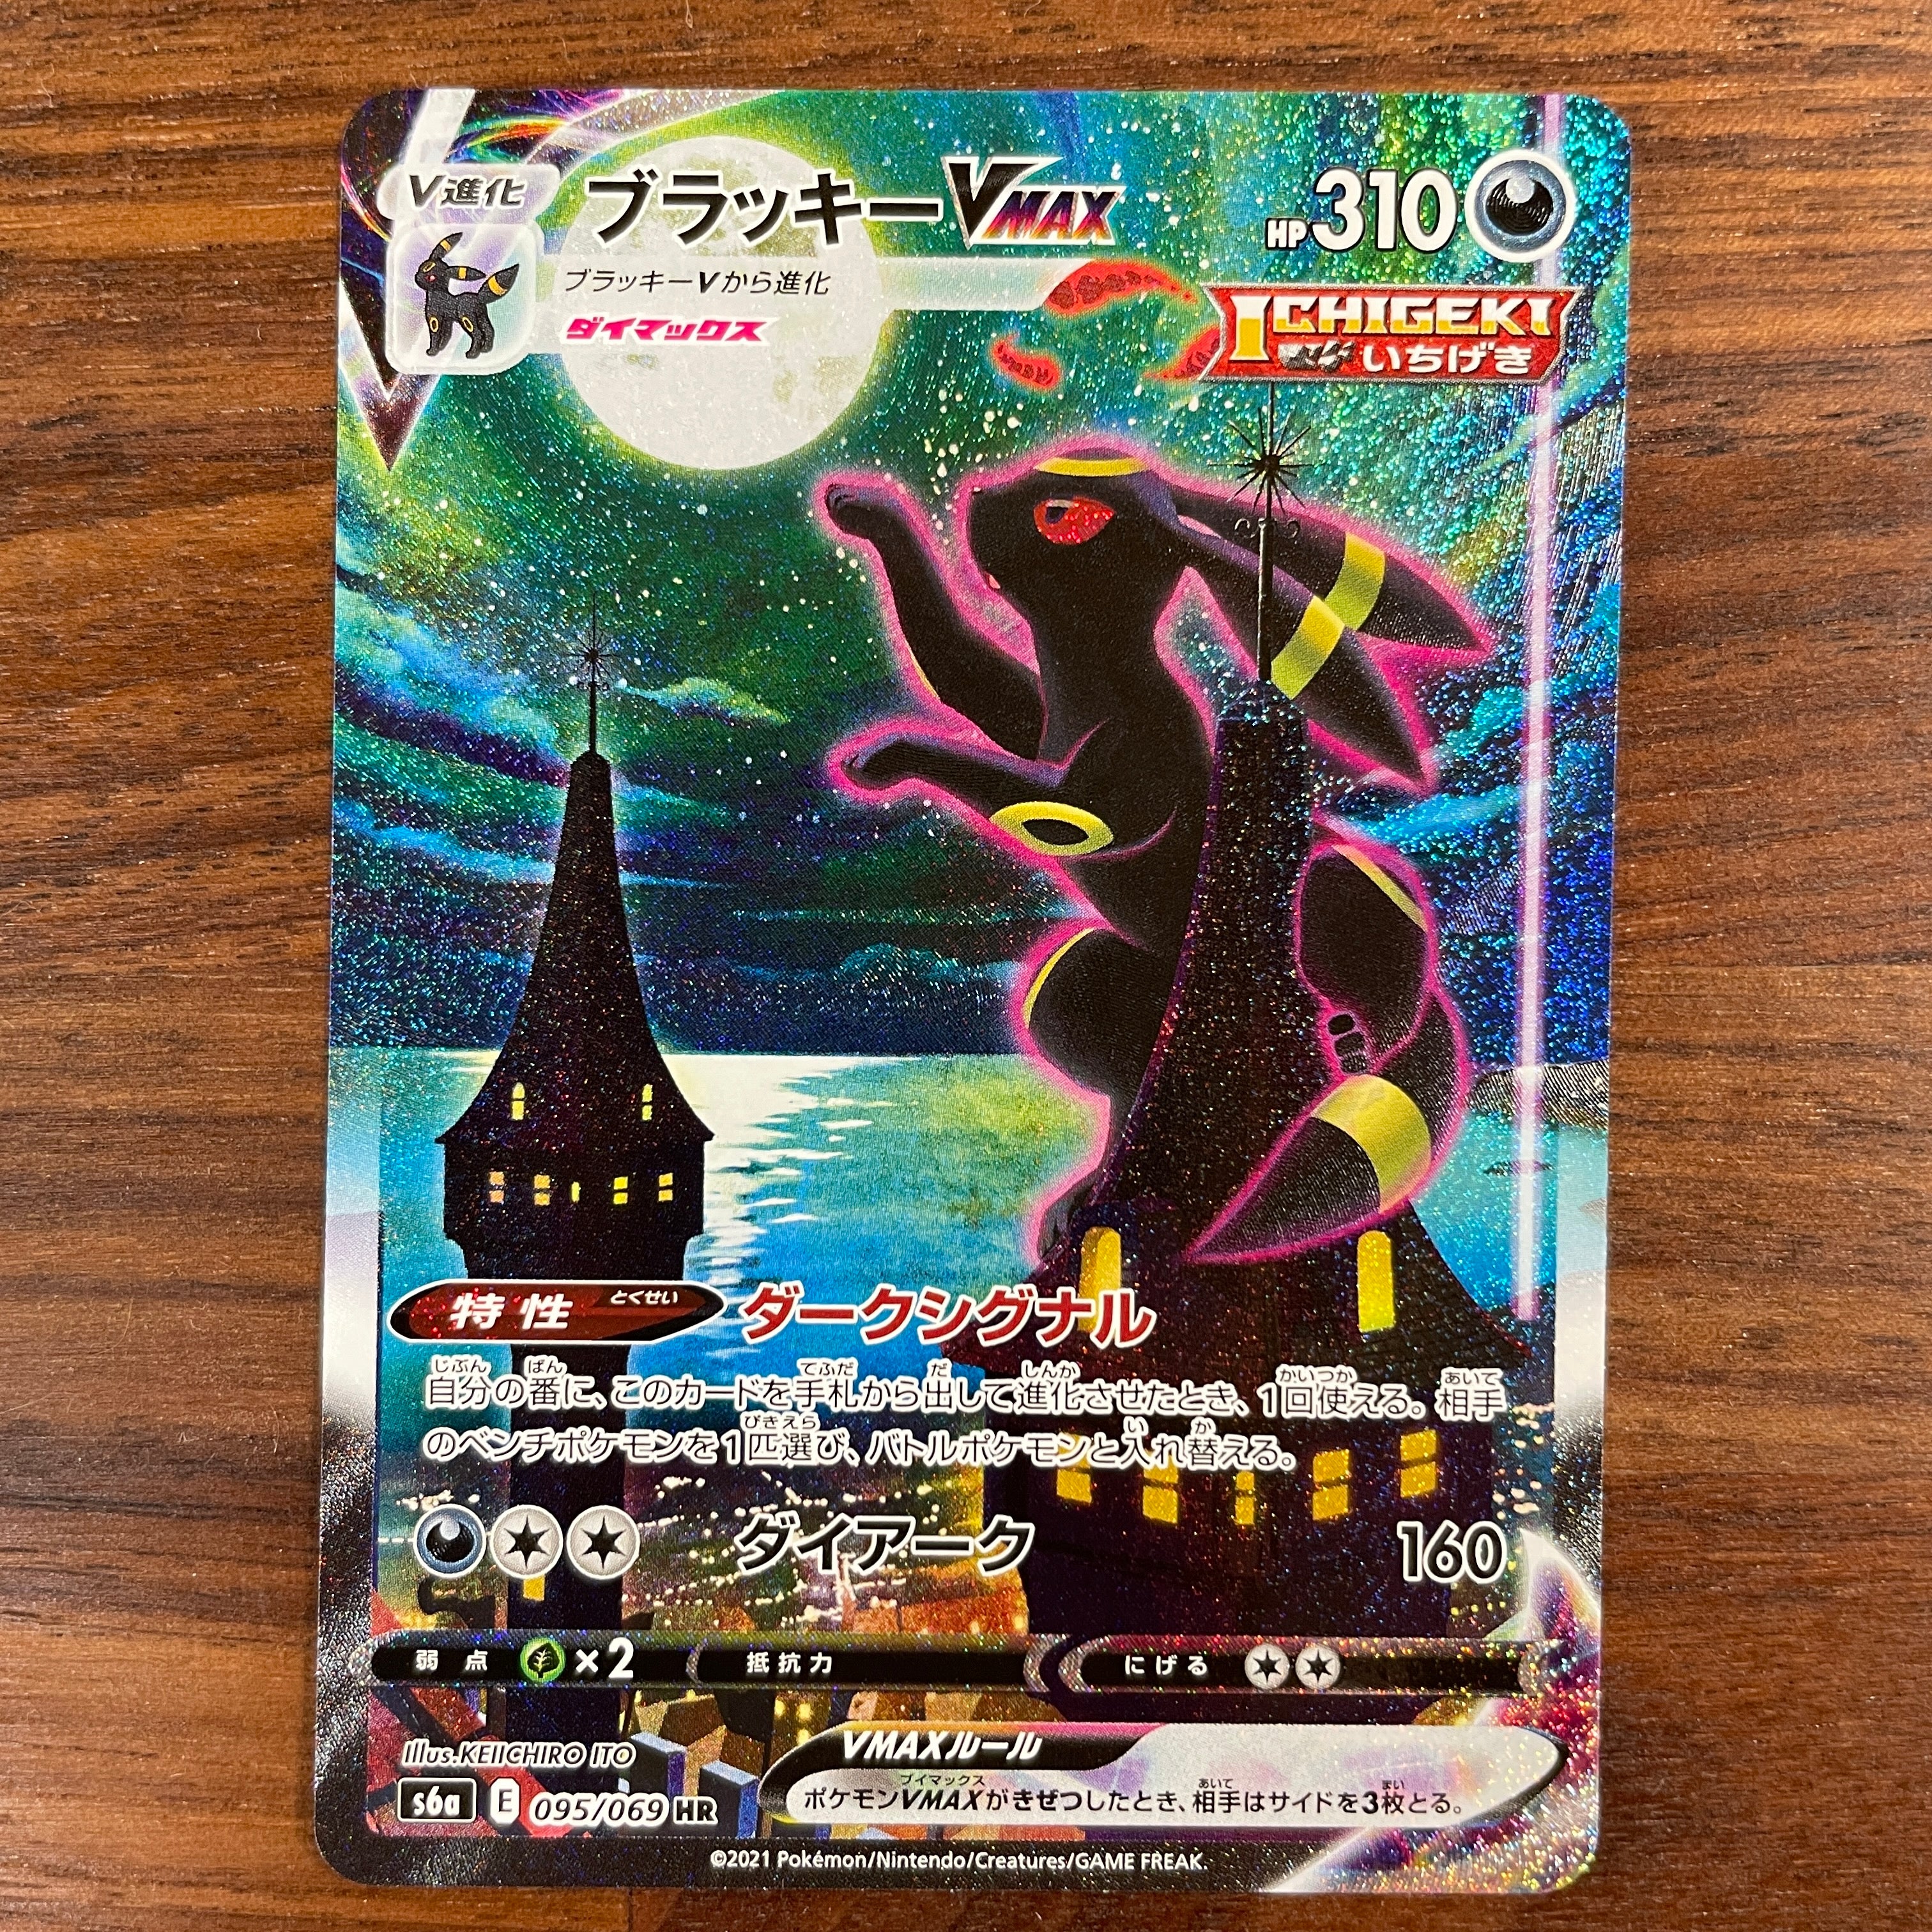 POKÉMON CARD GAME Sword & Shield Expansion pack ｢Eevee Heroes｣  POKÉMON CARD GAME s6a 095/069 Hyper Rare card  Umbreon VMAX